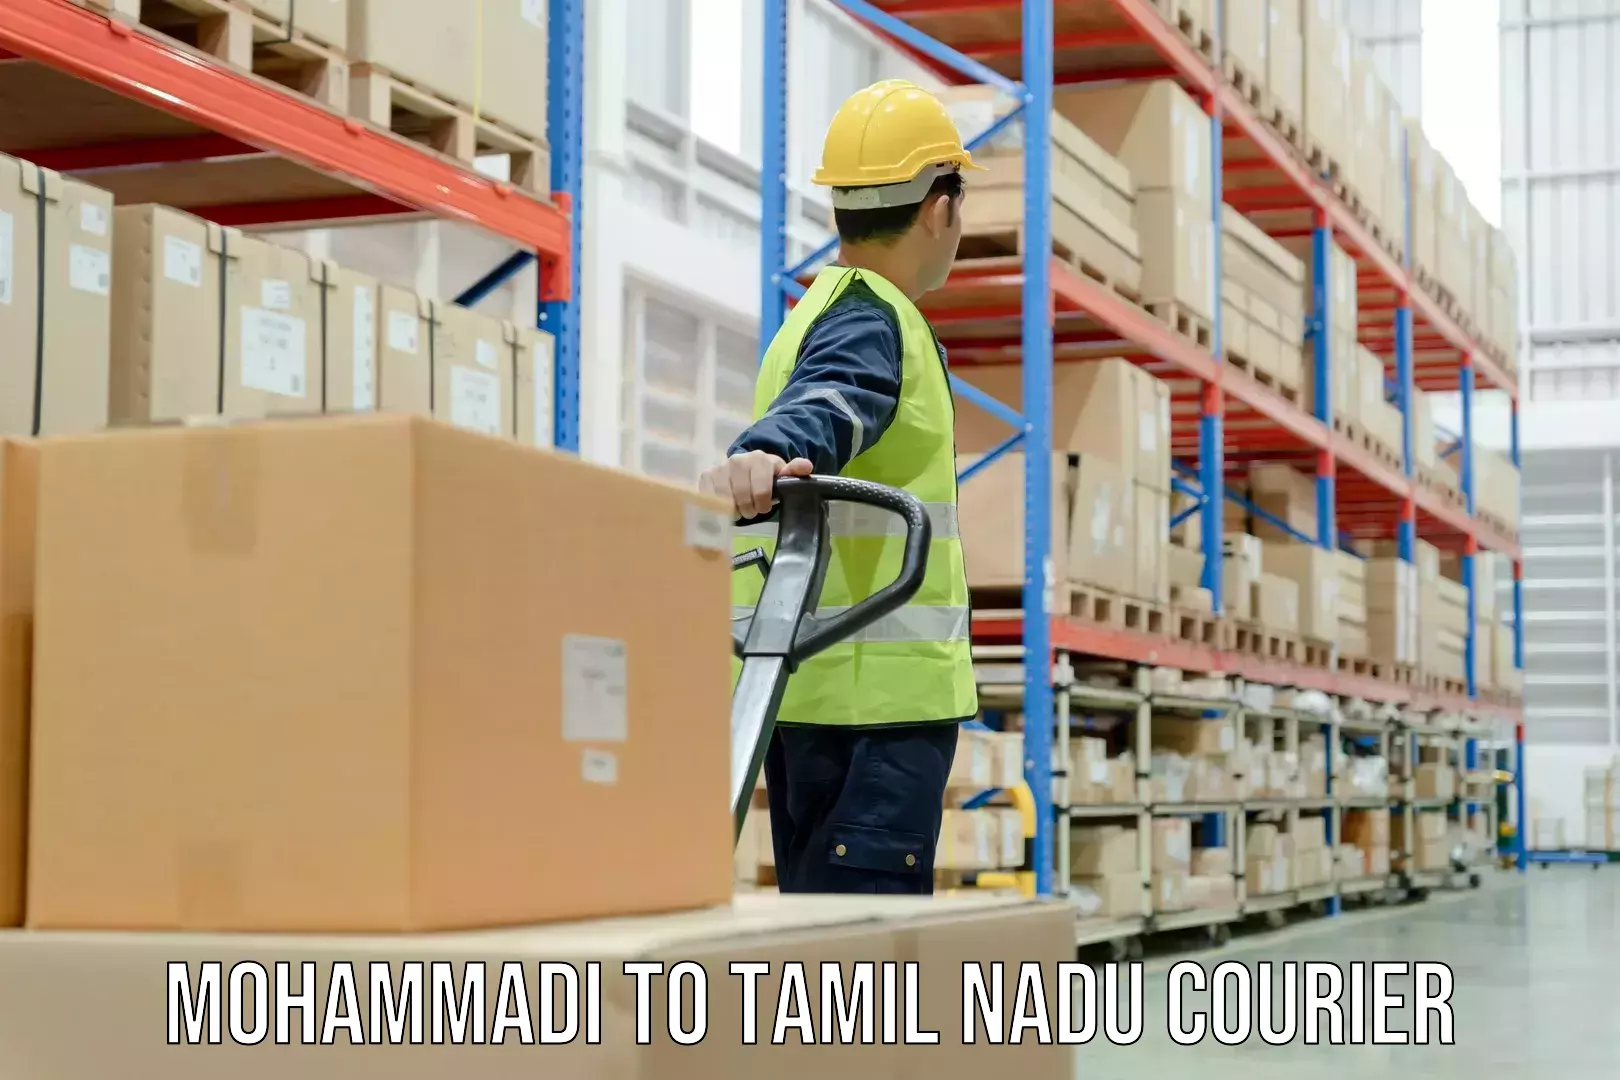 International courier networks Mohammadi to Vellore Institute of Technology